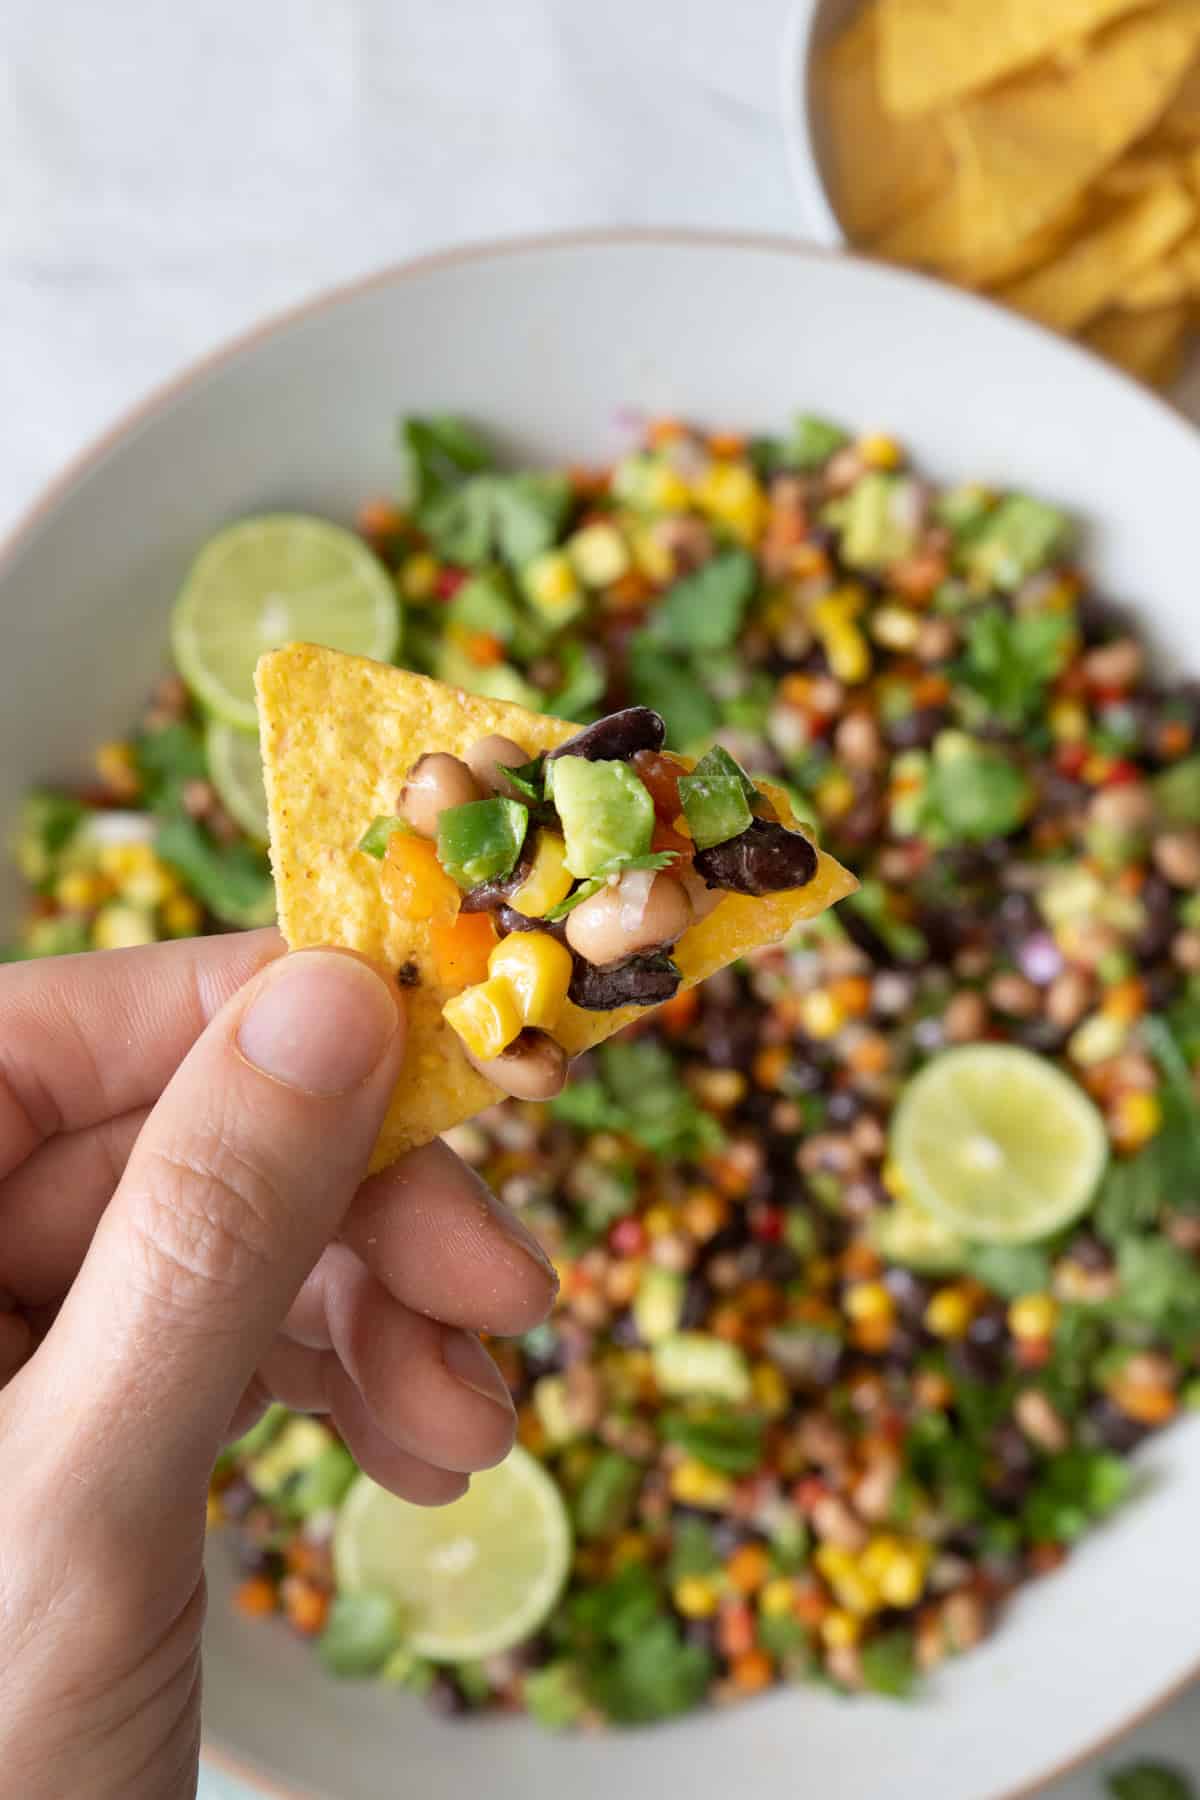 Overhead shot showing bowl of cowboy caviar underneath a hand holding a tortilla chip with recipe loaded on it.